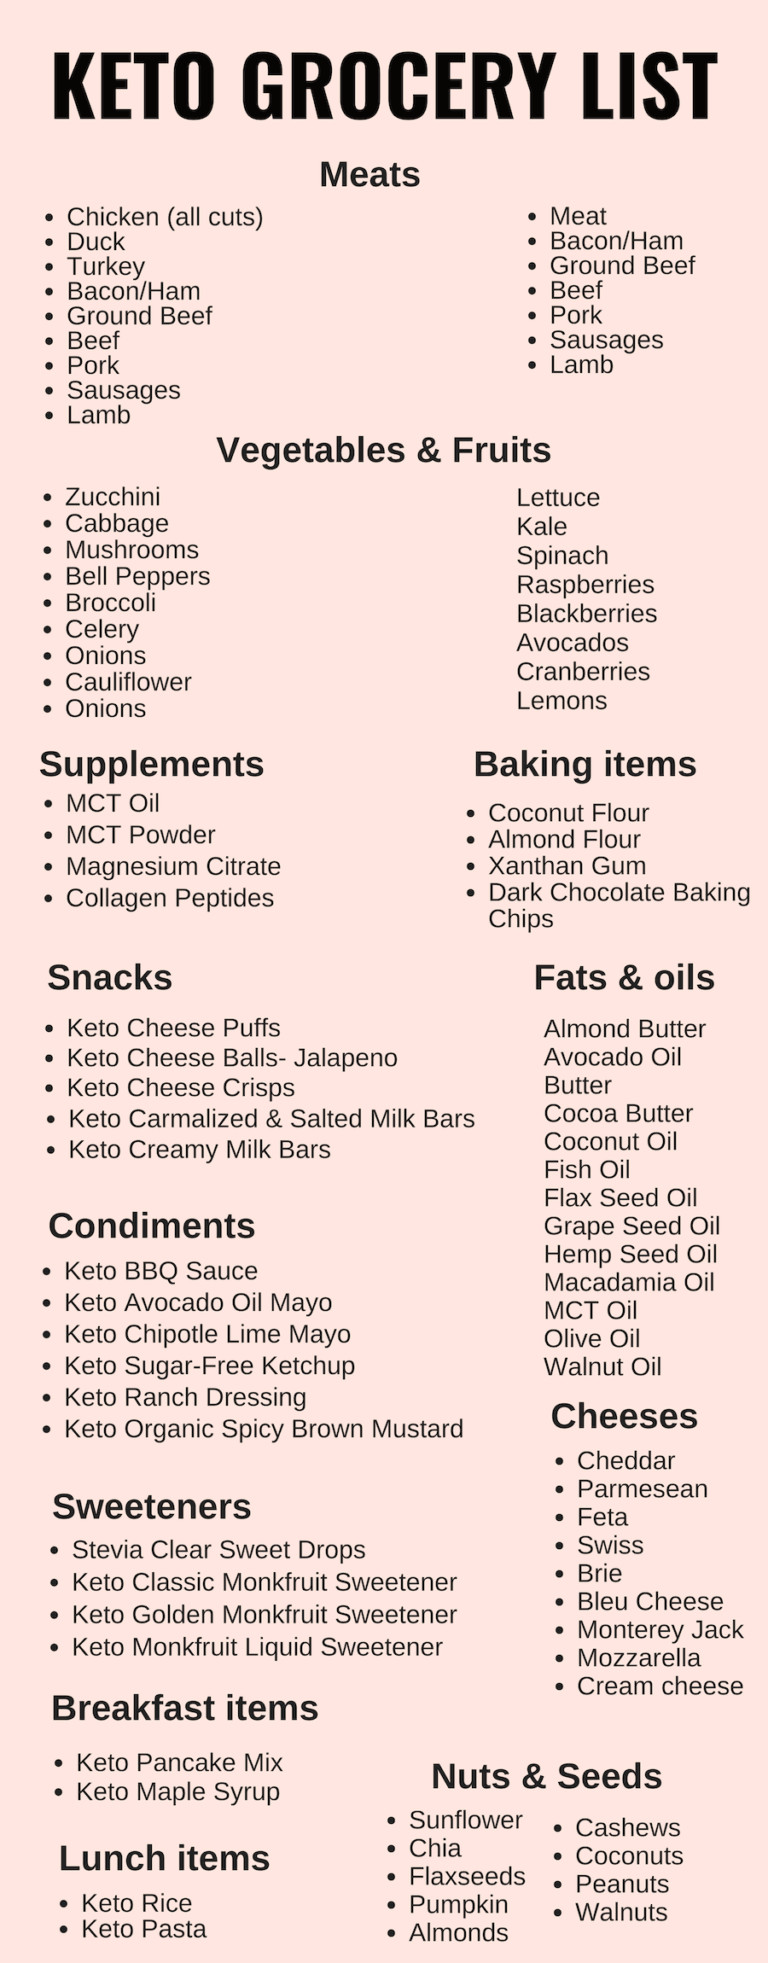 Keto Diet For Beginners Keto Diet For Beginners Meal Plan With Grocery List
 Keto Grocery List For Beginners Simple Grocery List